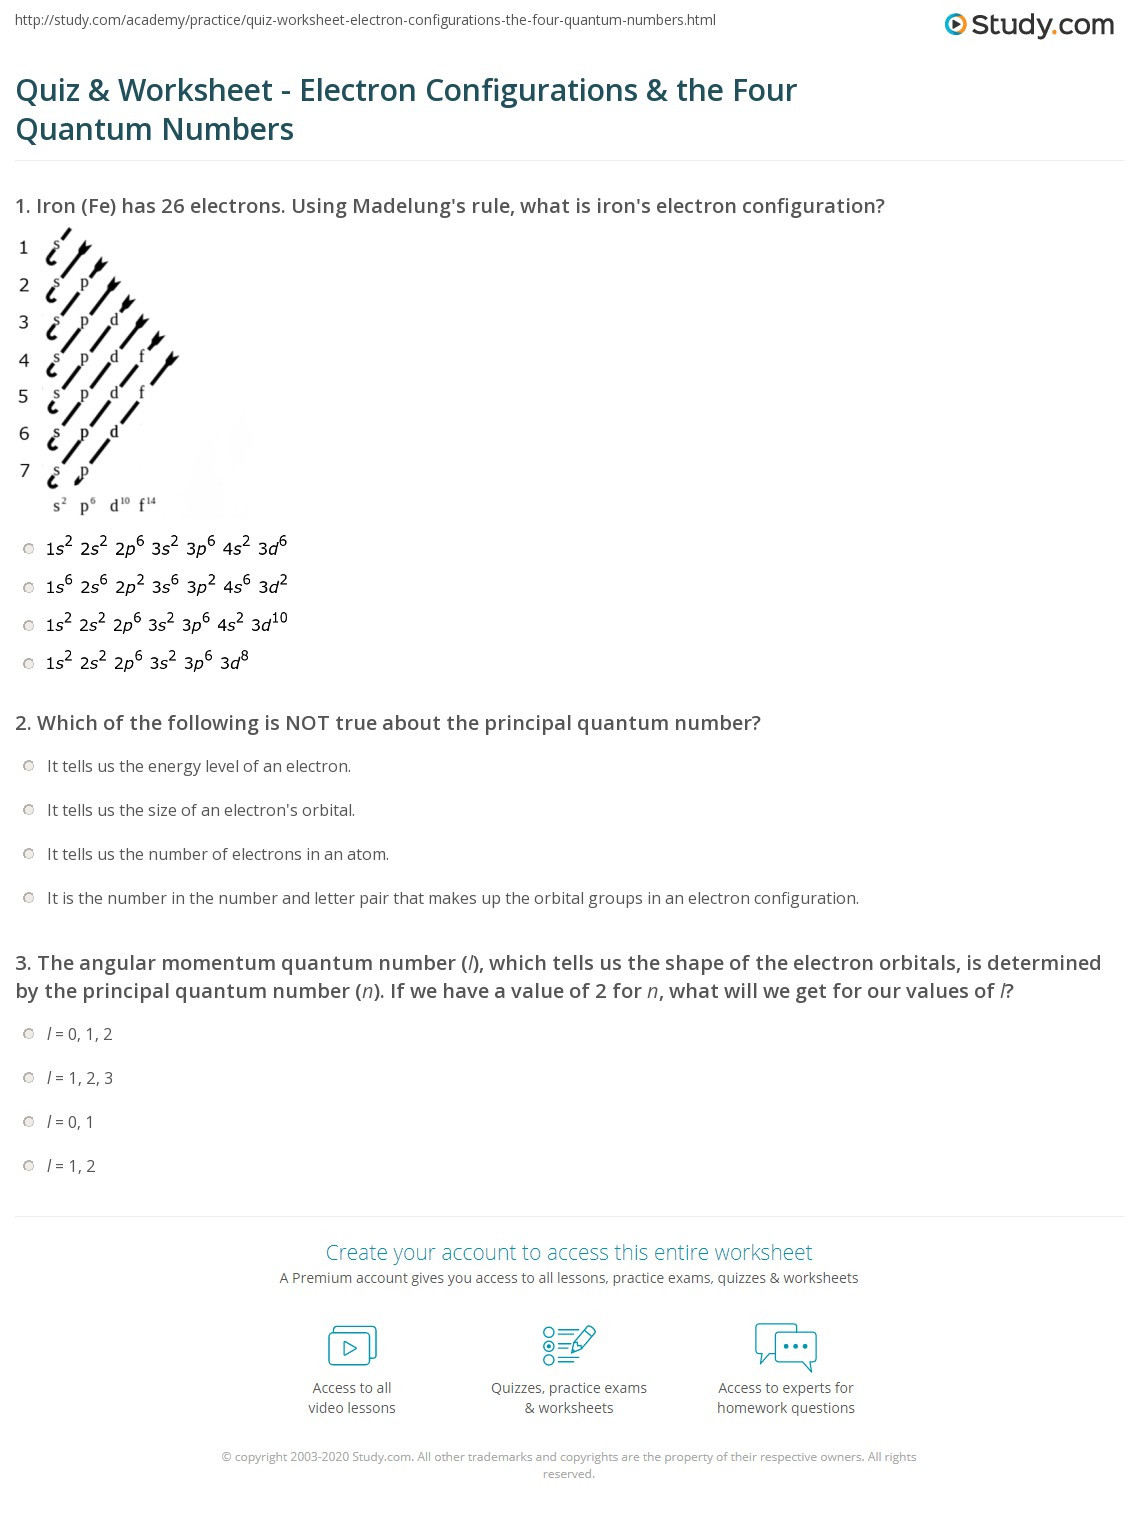 Quantum Numbers Practice Worksheet Quiz &amp; Worksheet Electron Configurations &amp; the Four